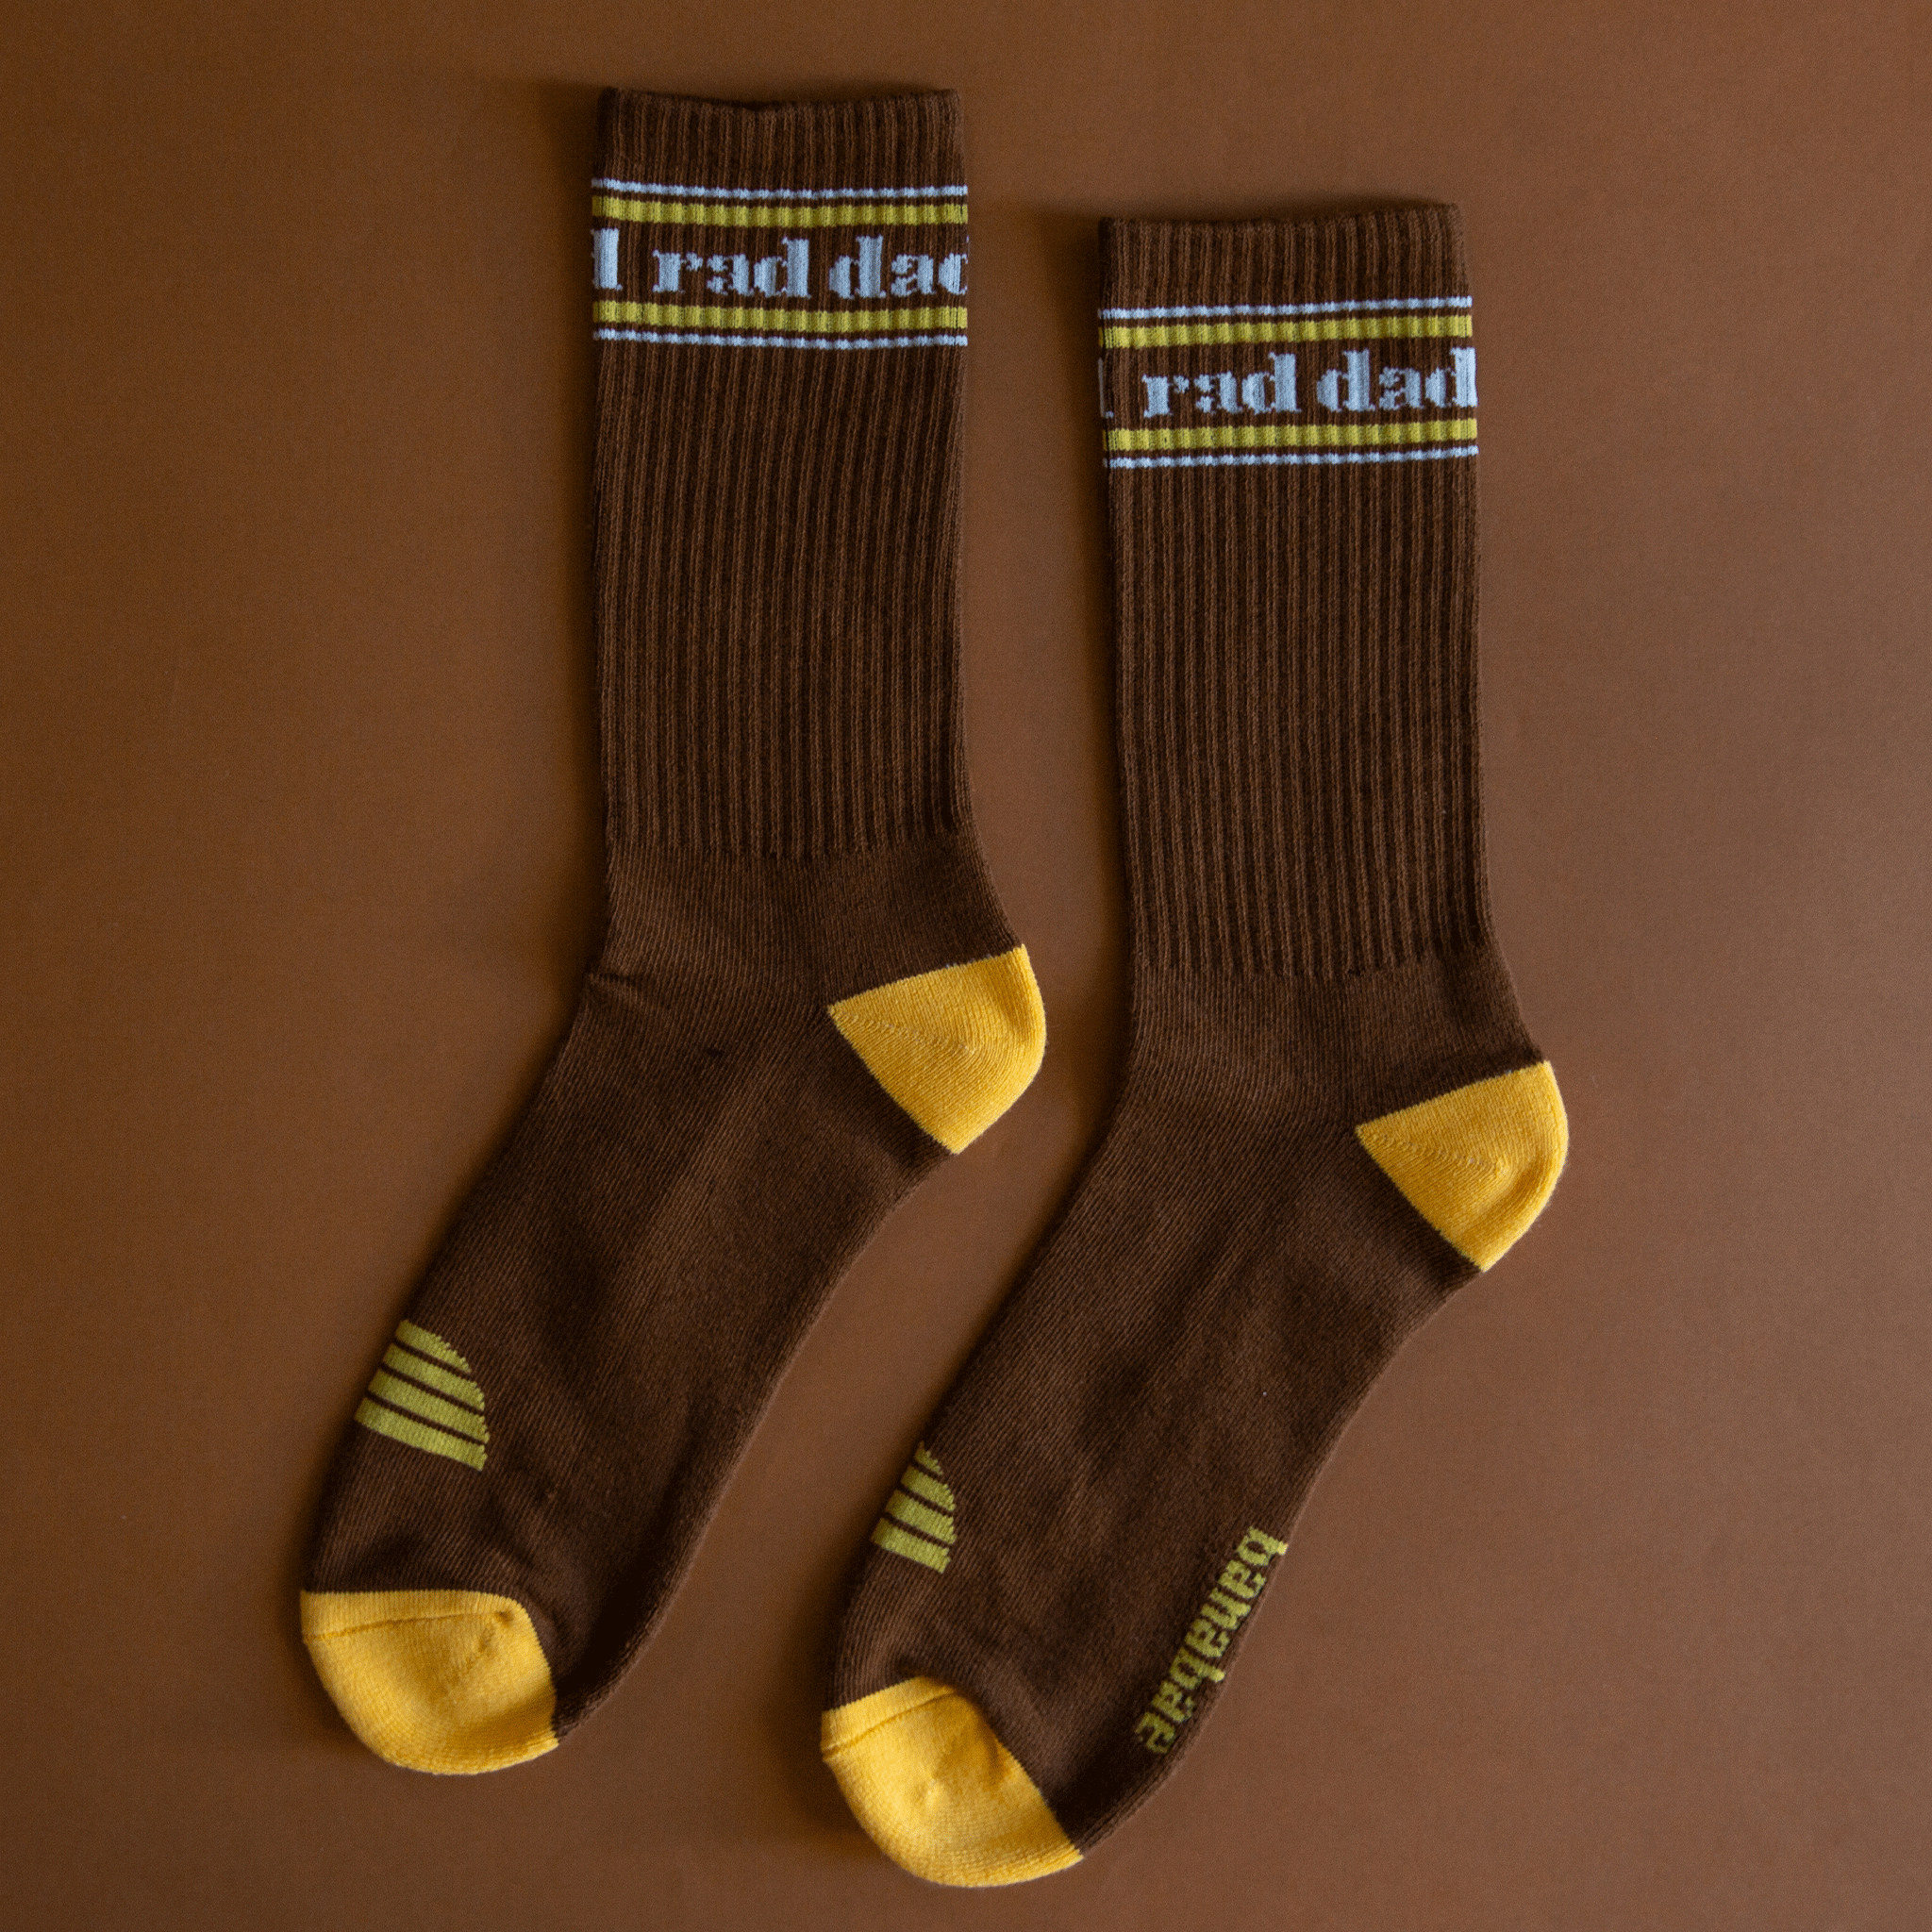 On a brown background is a pair of brown and yellow socks with white text at the top that reads, "rad dad".